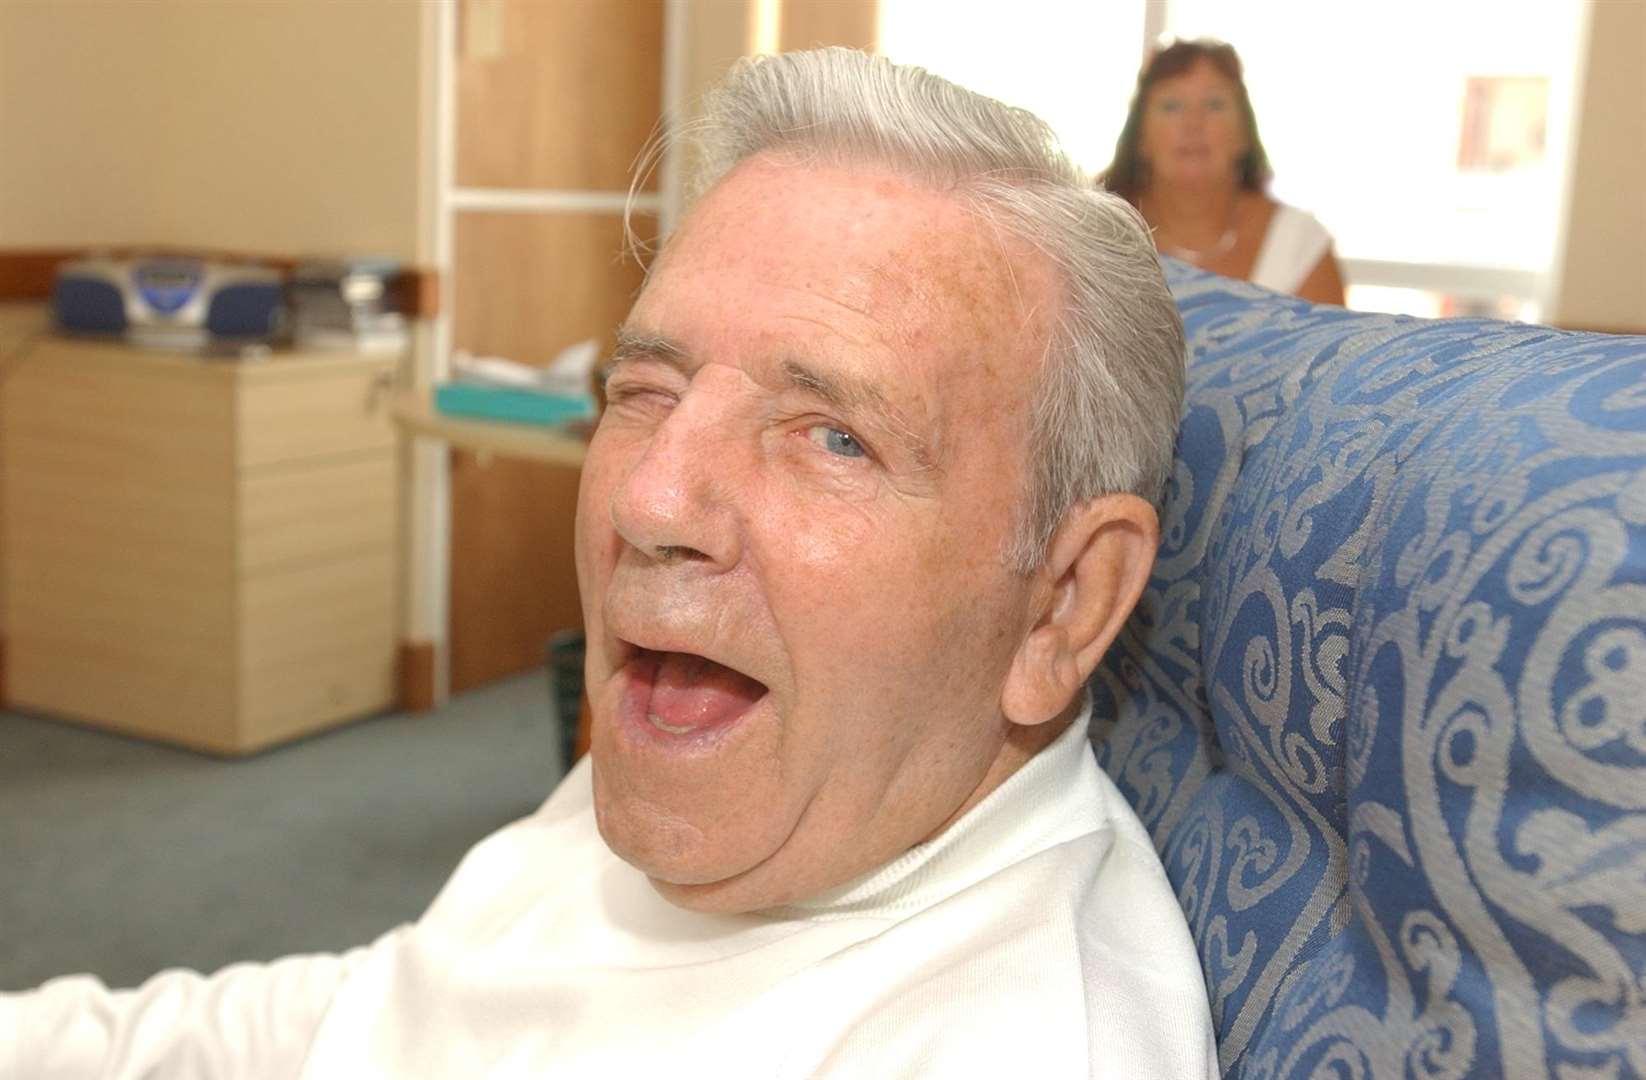 The late Sir Norman Wisdom strutted his stuff in panto across the UK during his long career